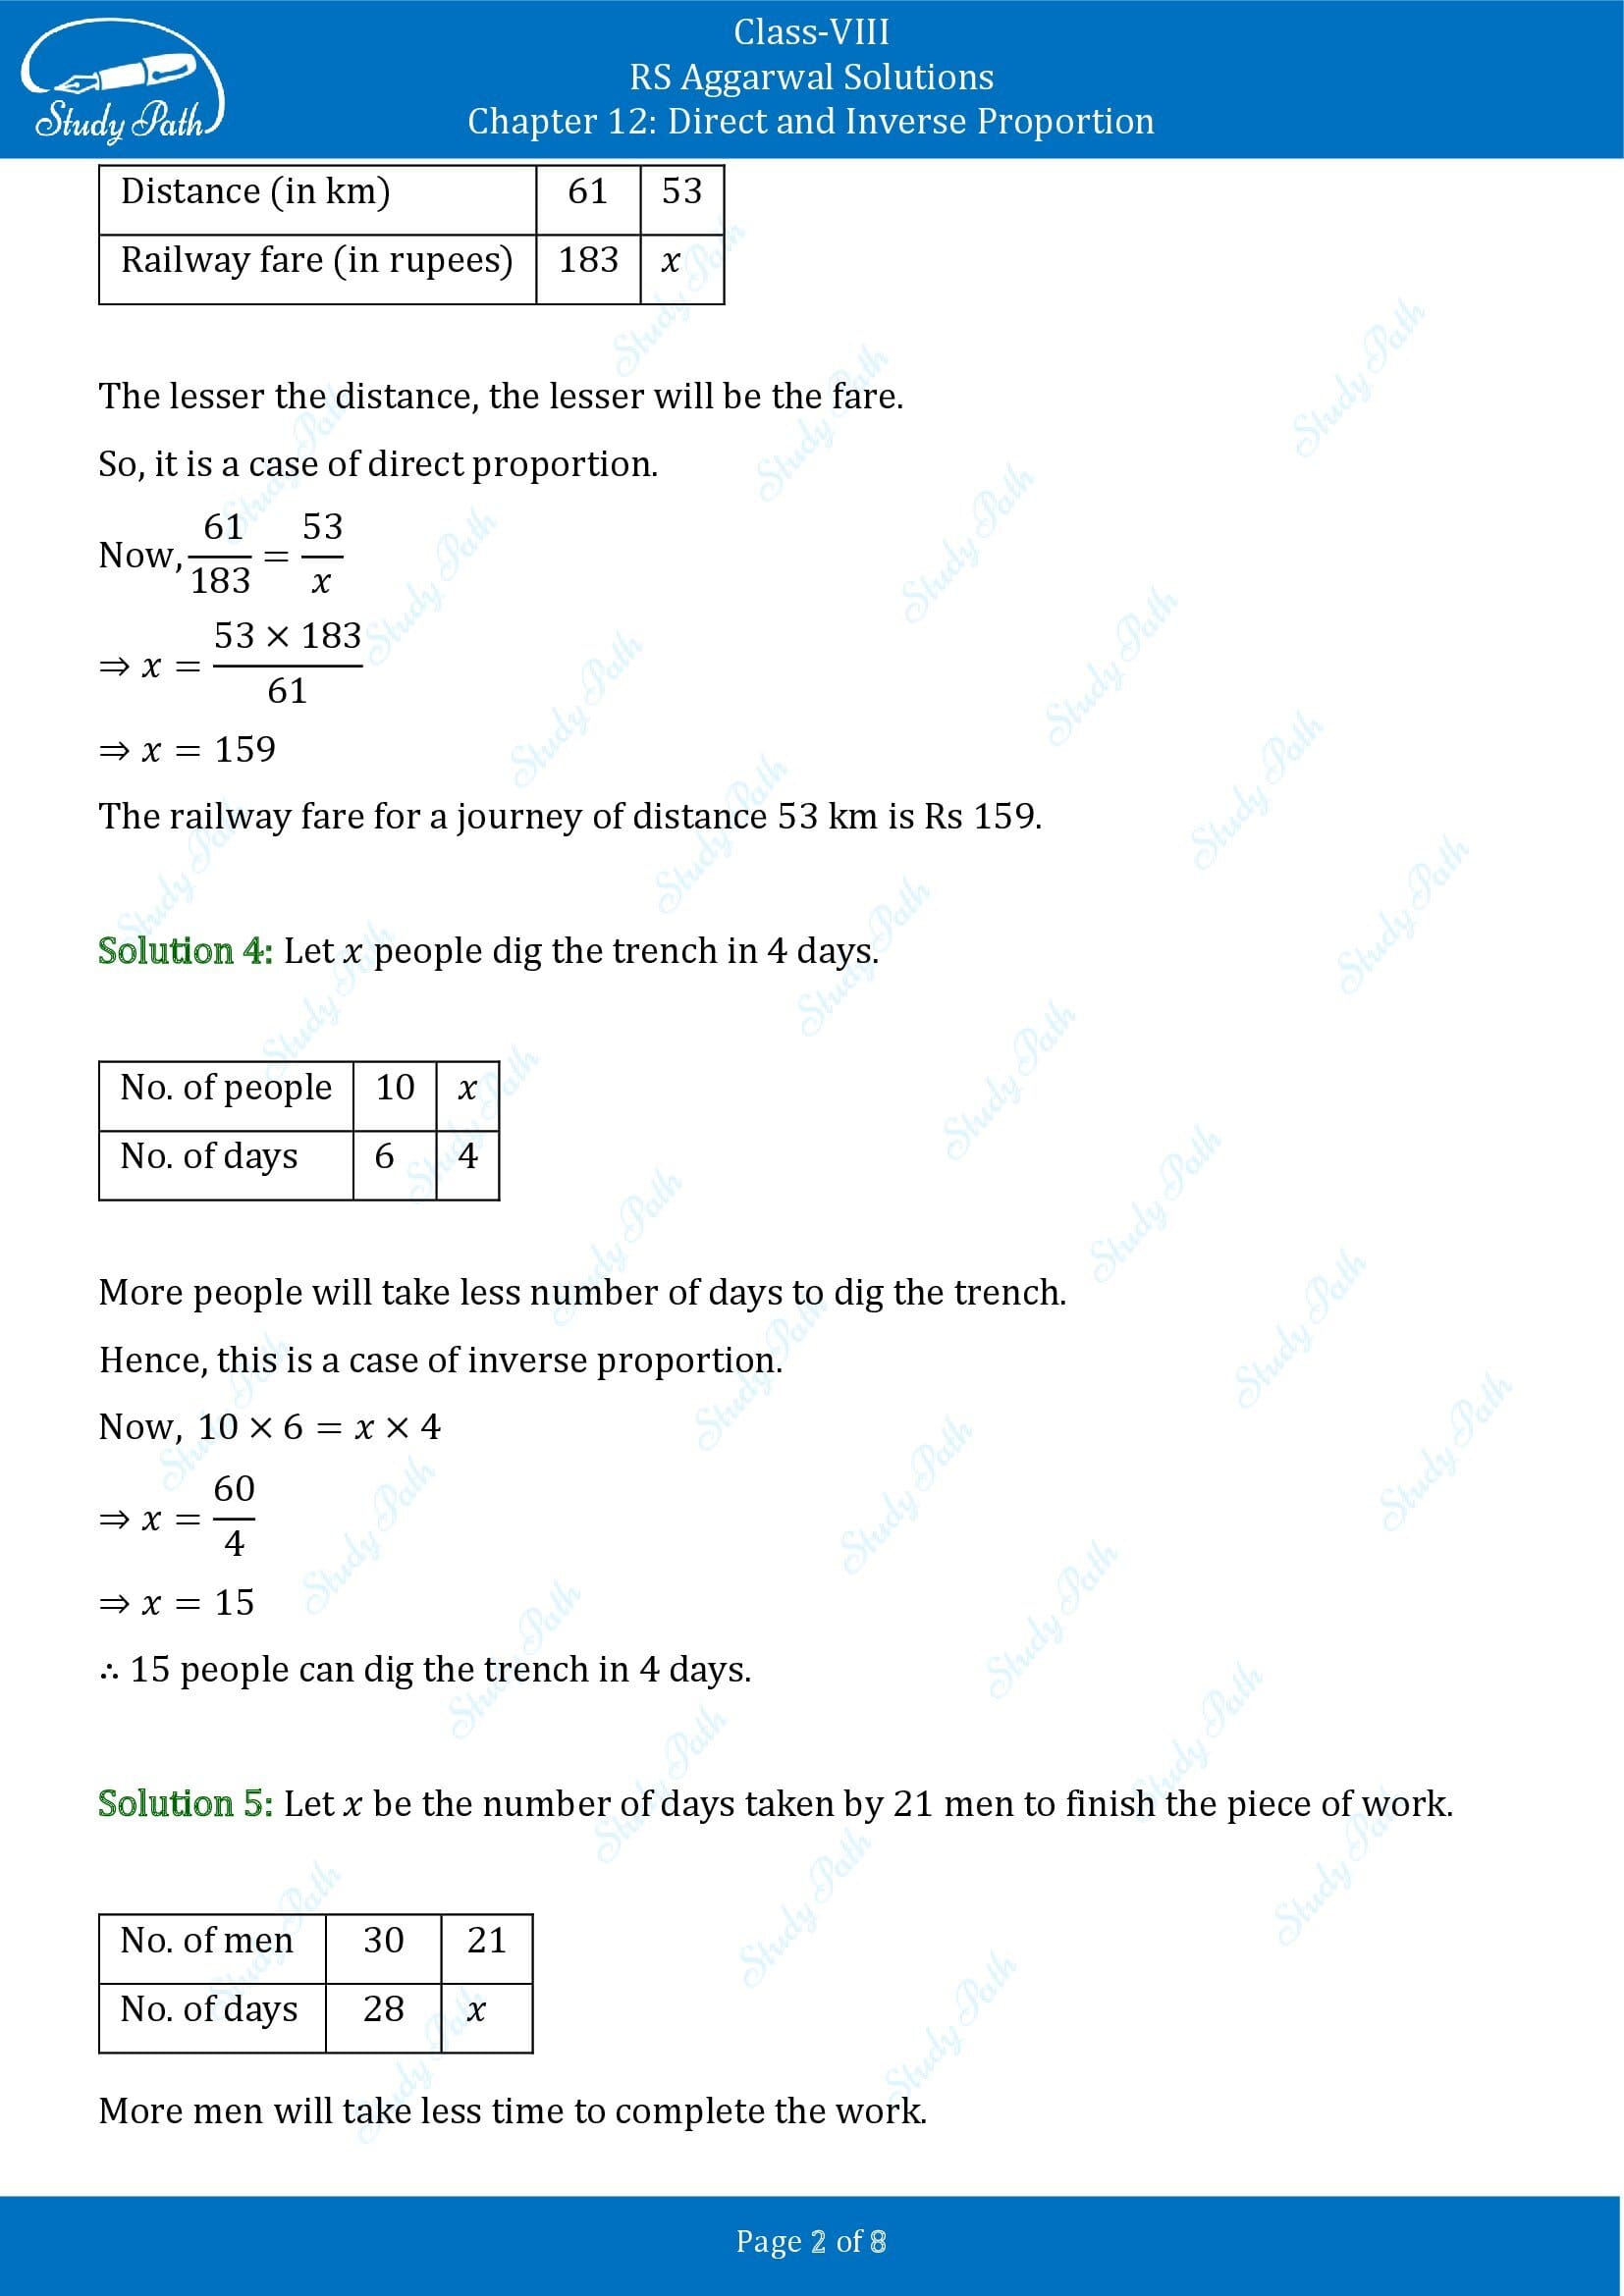 RS Aggarwal Solutions Class 8 Chapter 12 Direct and Inverse Proportion Test Paper 00002